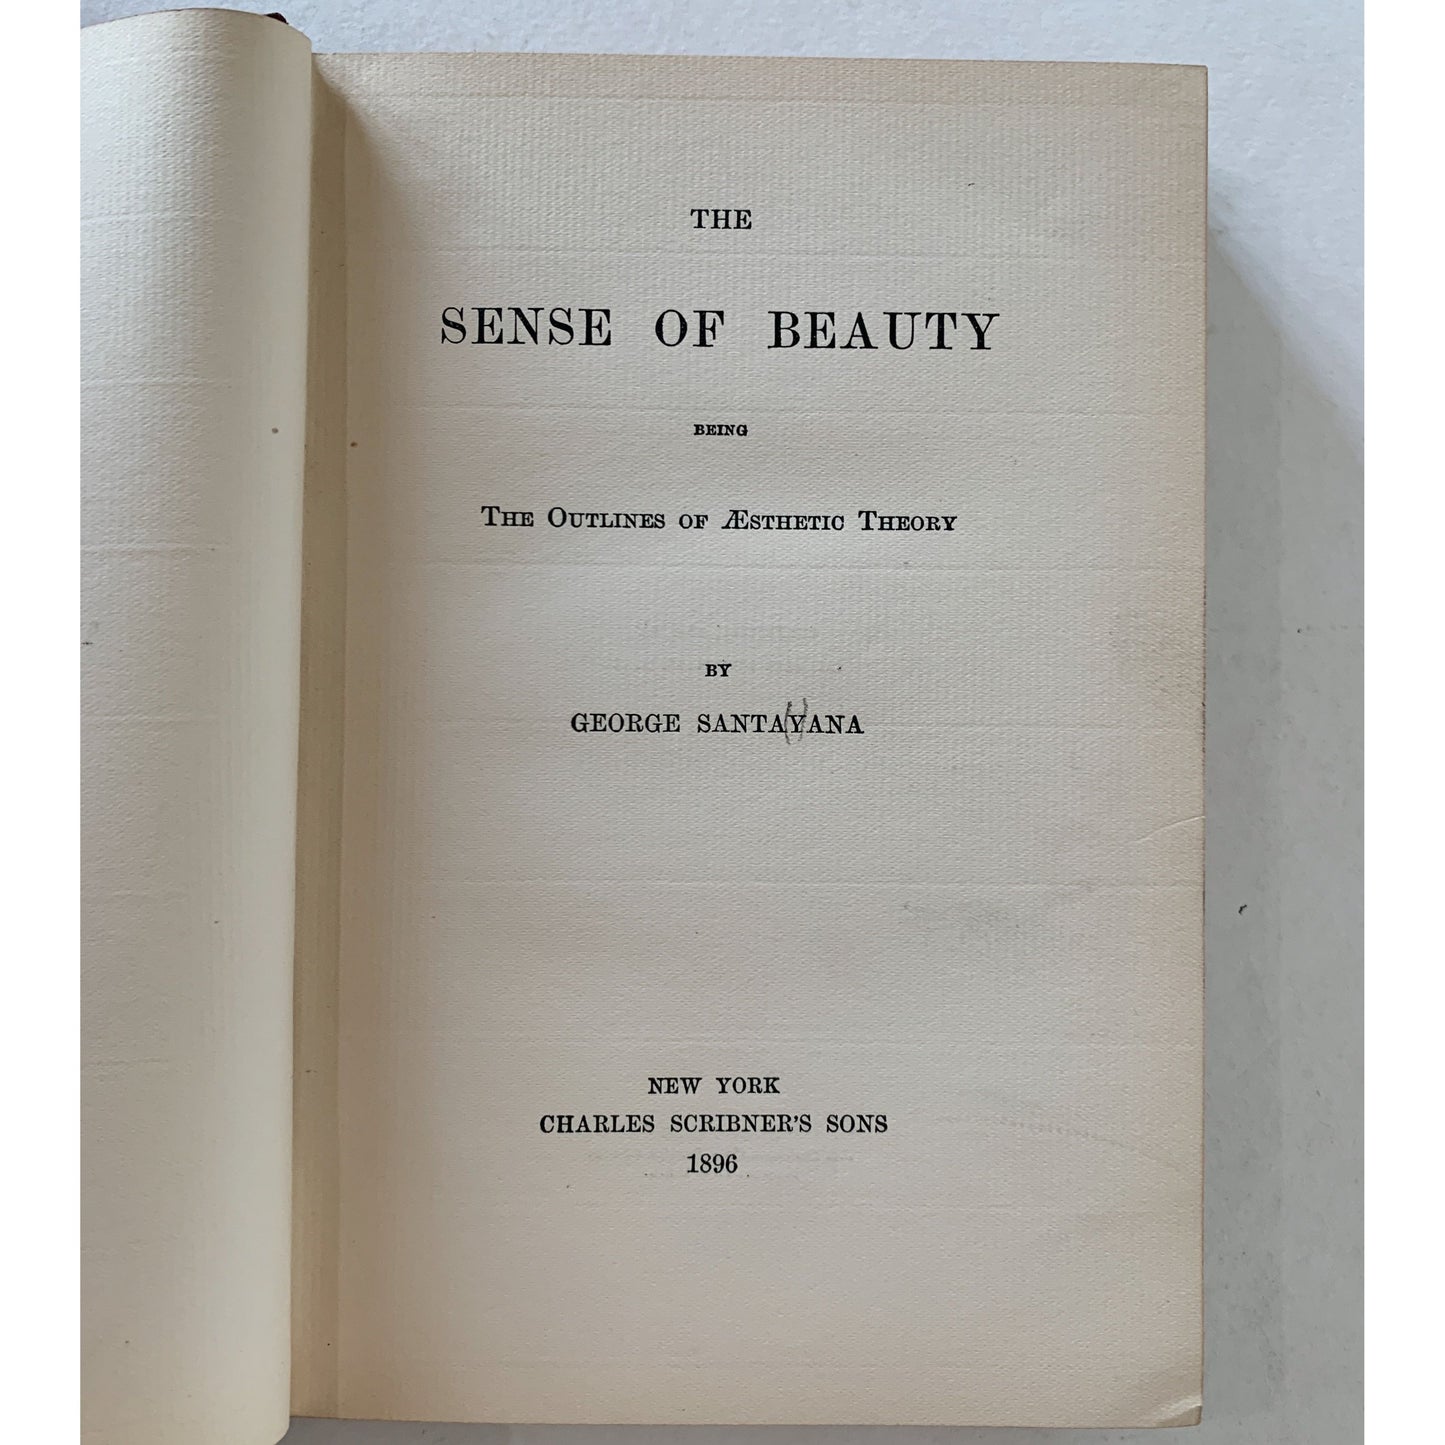 The Sense of Beauty, George Santayana, First Edition, 1896